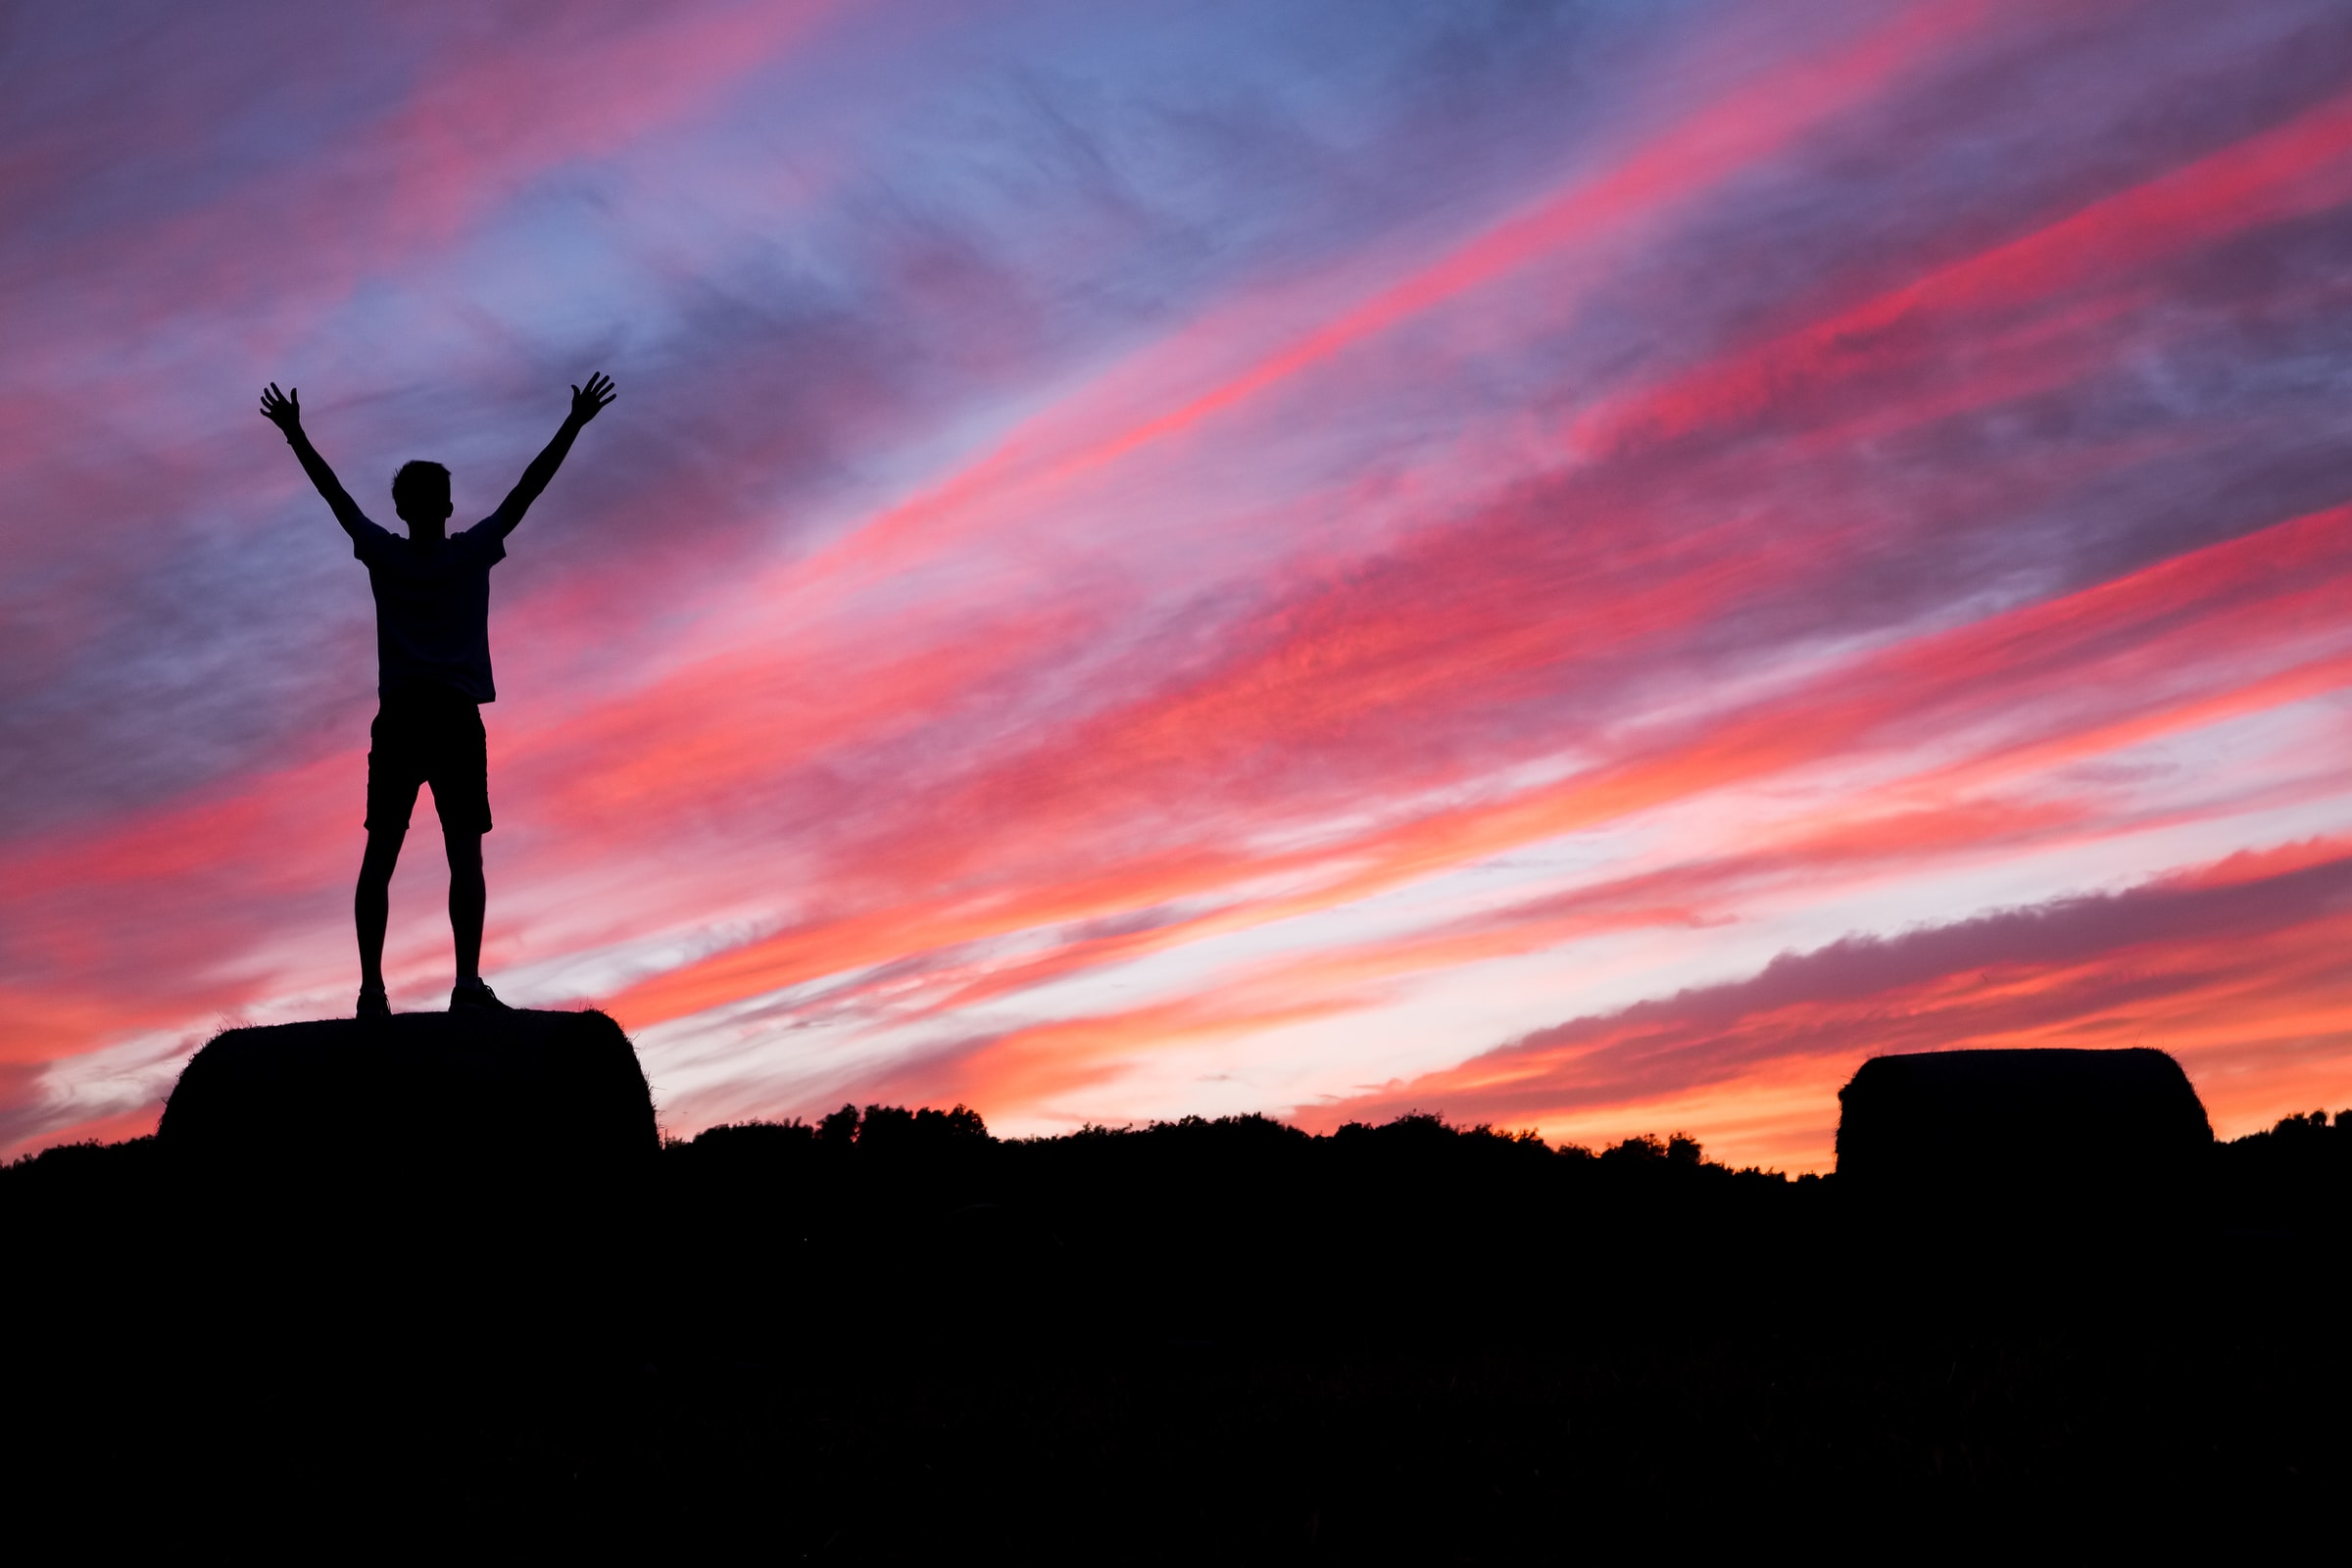 A man standing on the top of a rock at night with his two hands raised to a colorful night sky